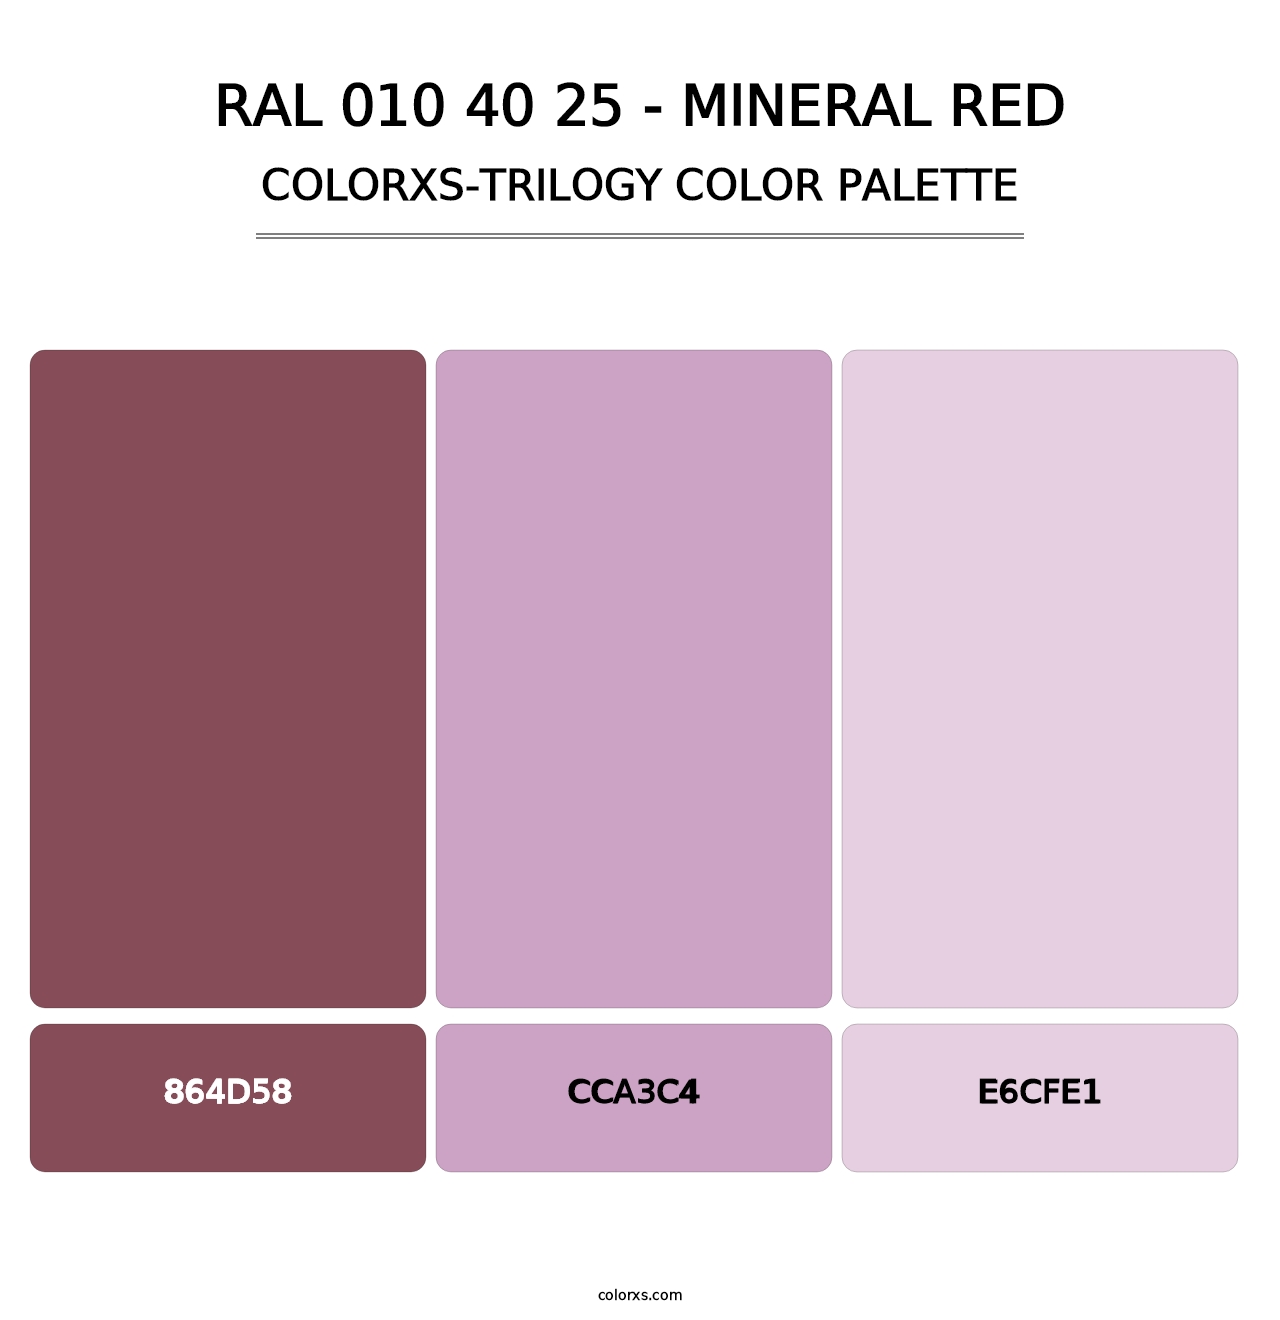 RAL 010 40 25 - Mineral Red - Colorxs Trilogy Palette